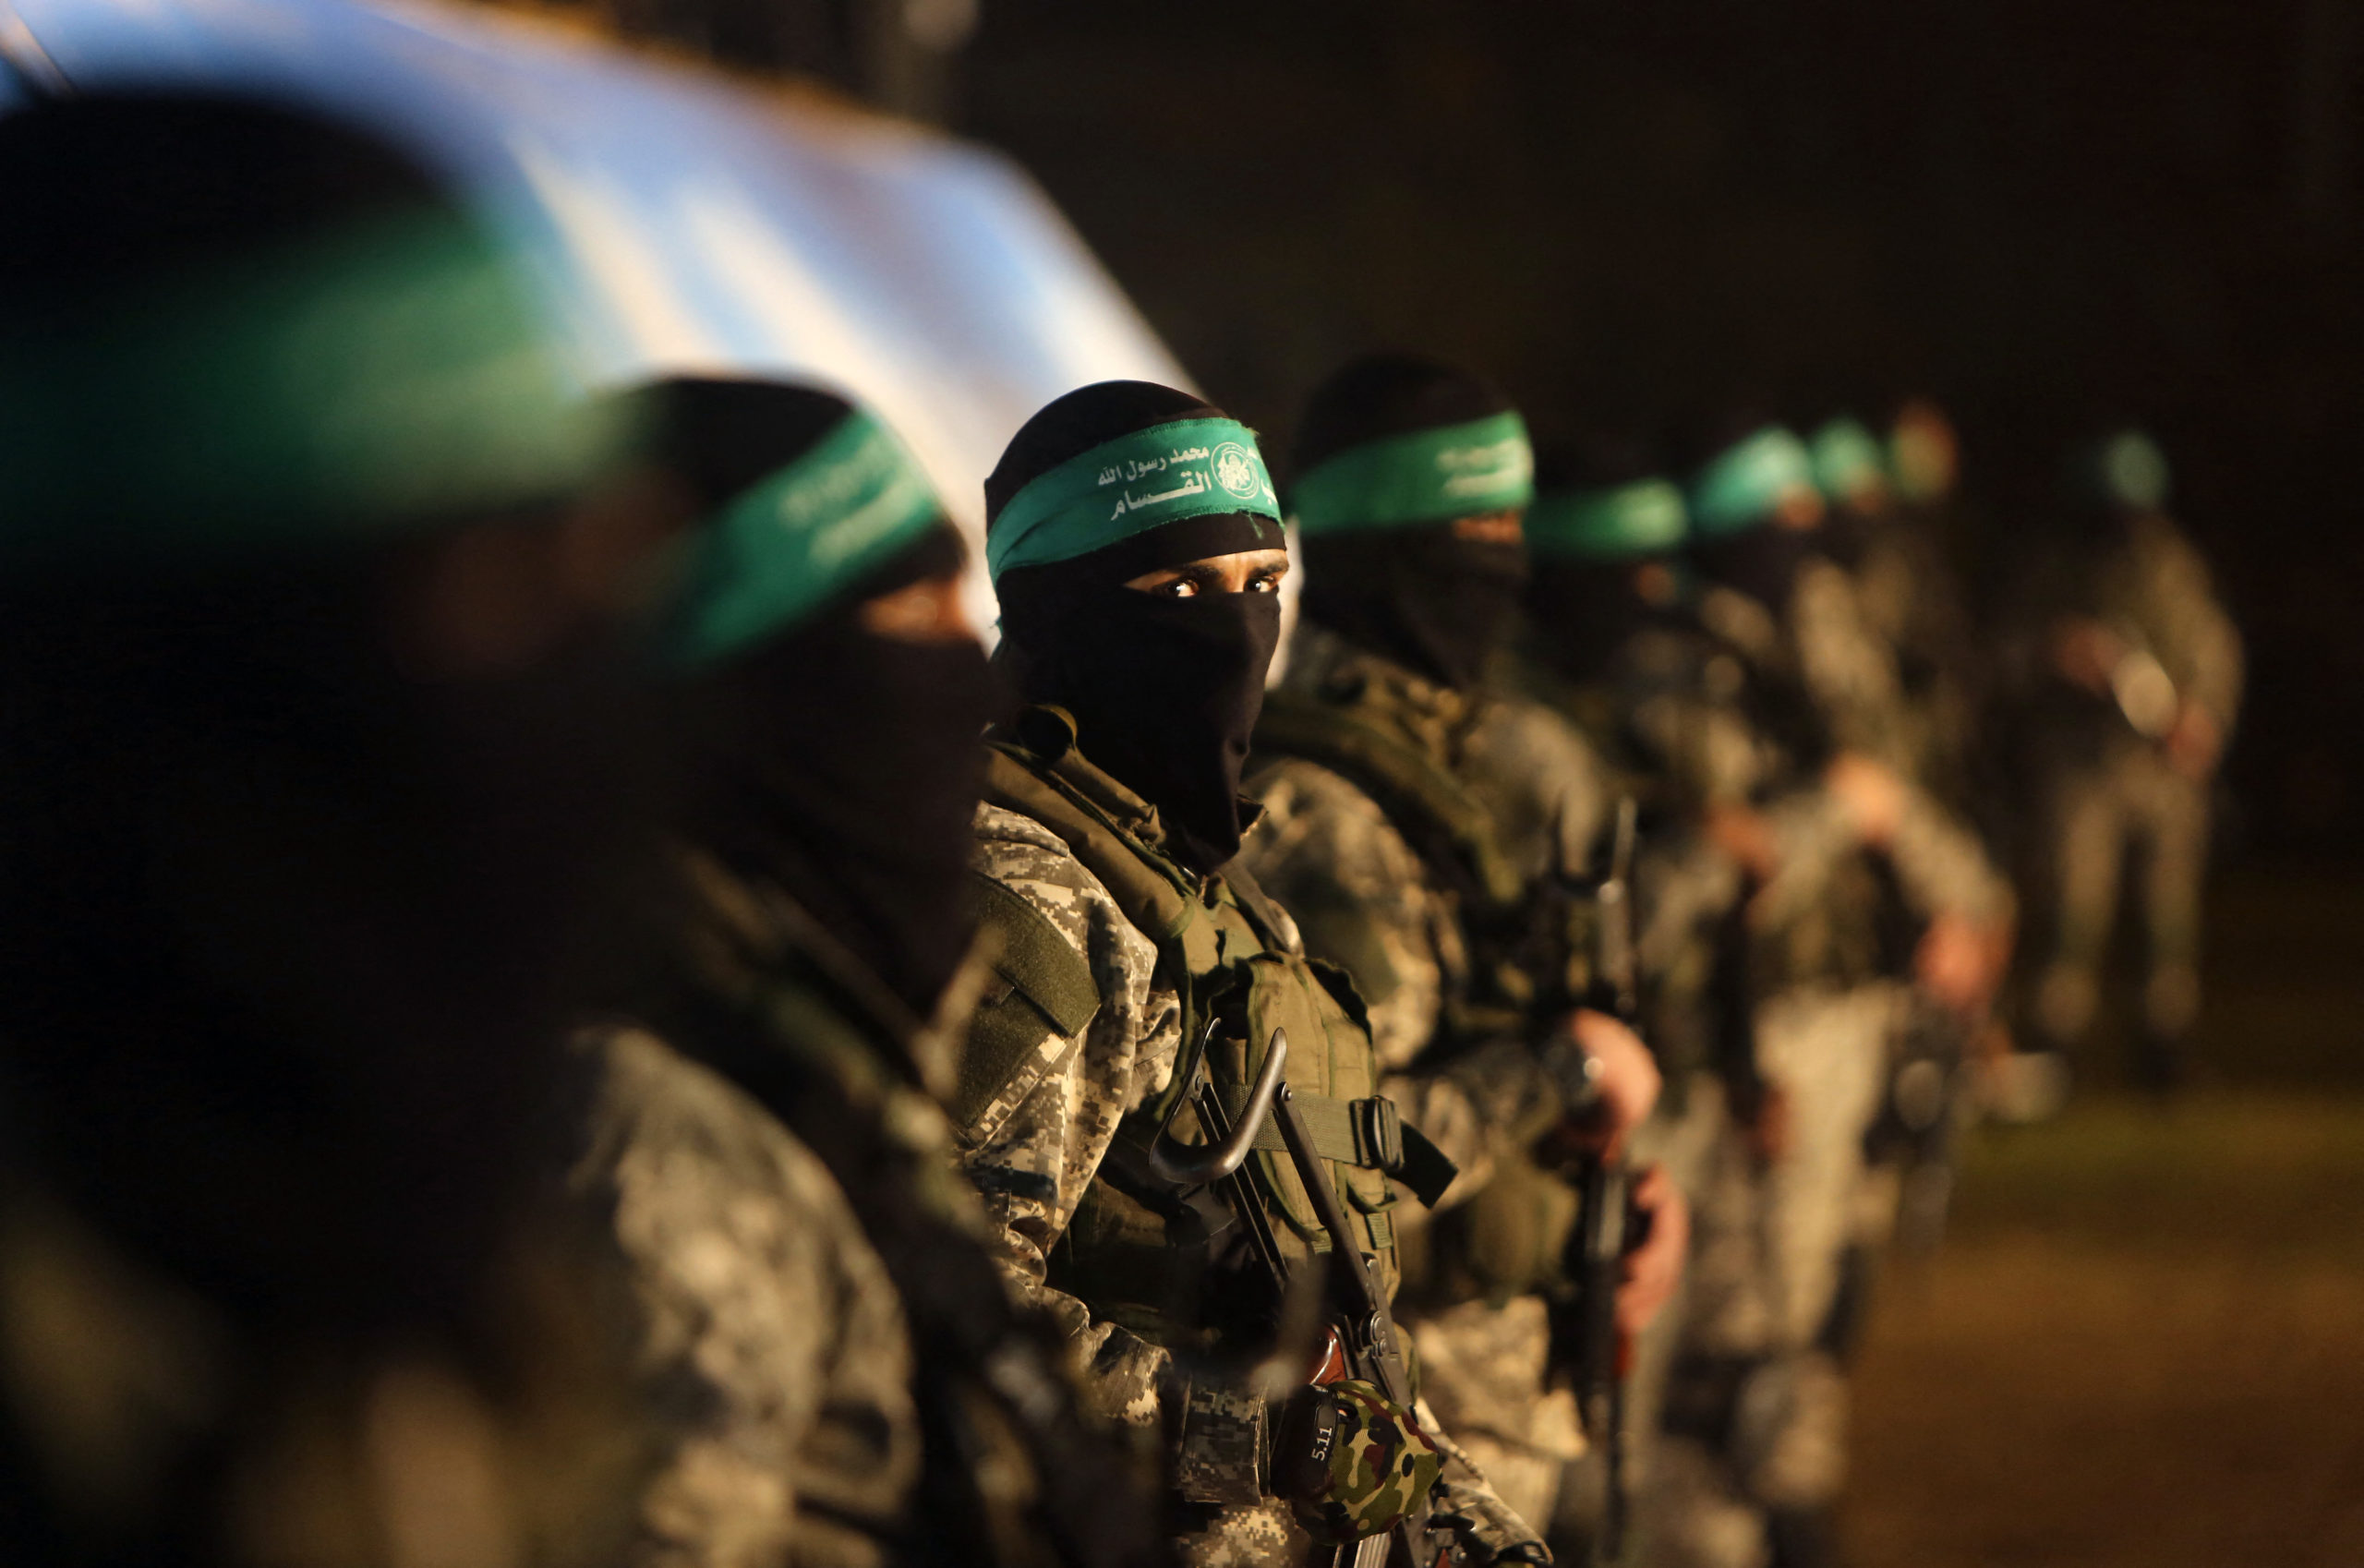 TOPSHOT - Palestinian members of the Ezzedine al-Qassam Brigades, the armed wing of the Hamas movement, take part in a gathering on January 31, 2016 in Gaza city to pay tribute to their fellow militants who died after a tunnel collapsed in the Gaza Strip. (Photo by MAHMUD HAMS/AFP via Getty Images)